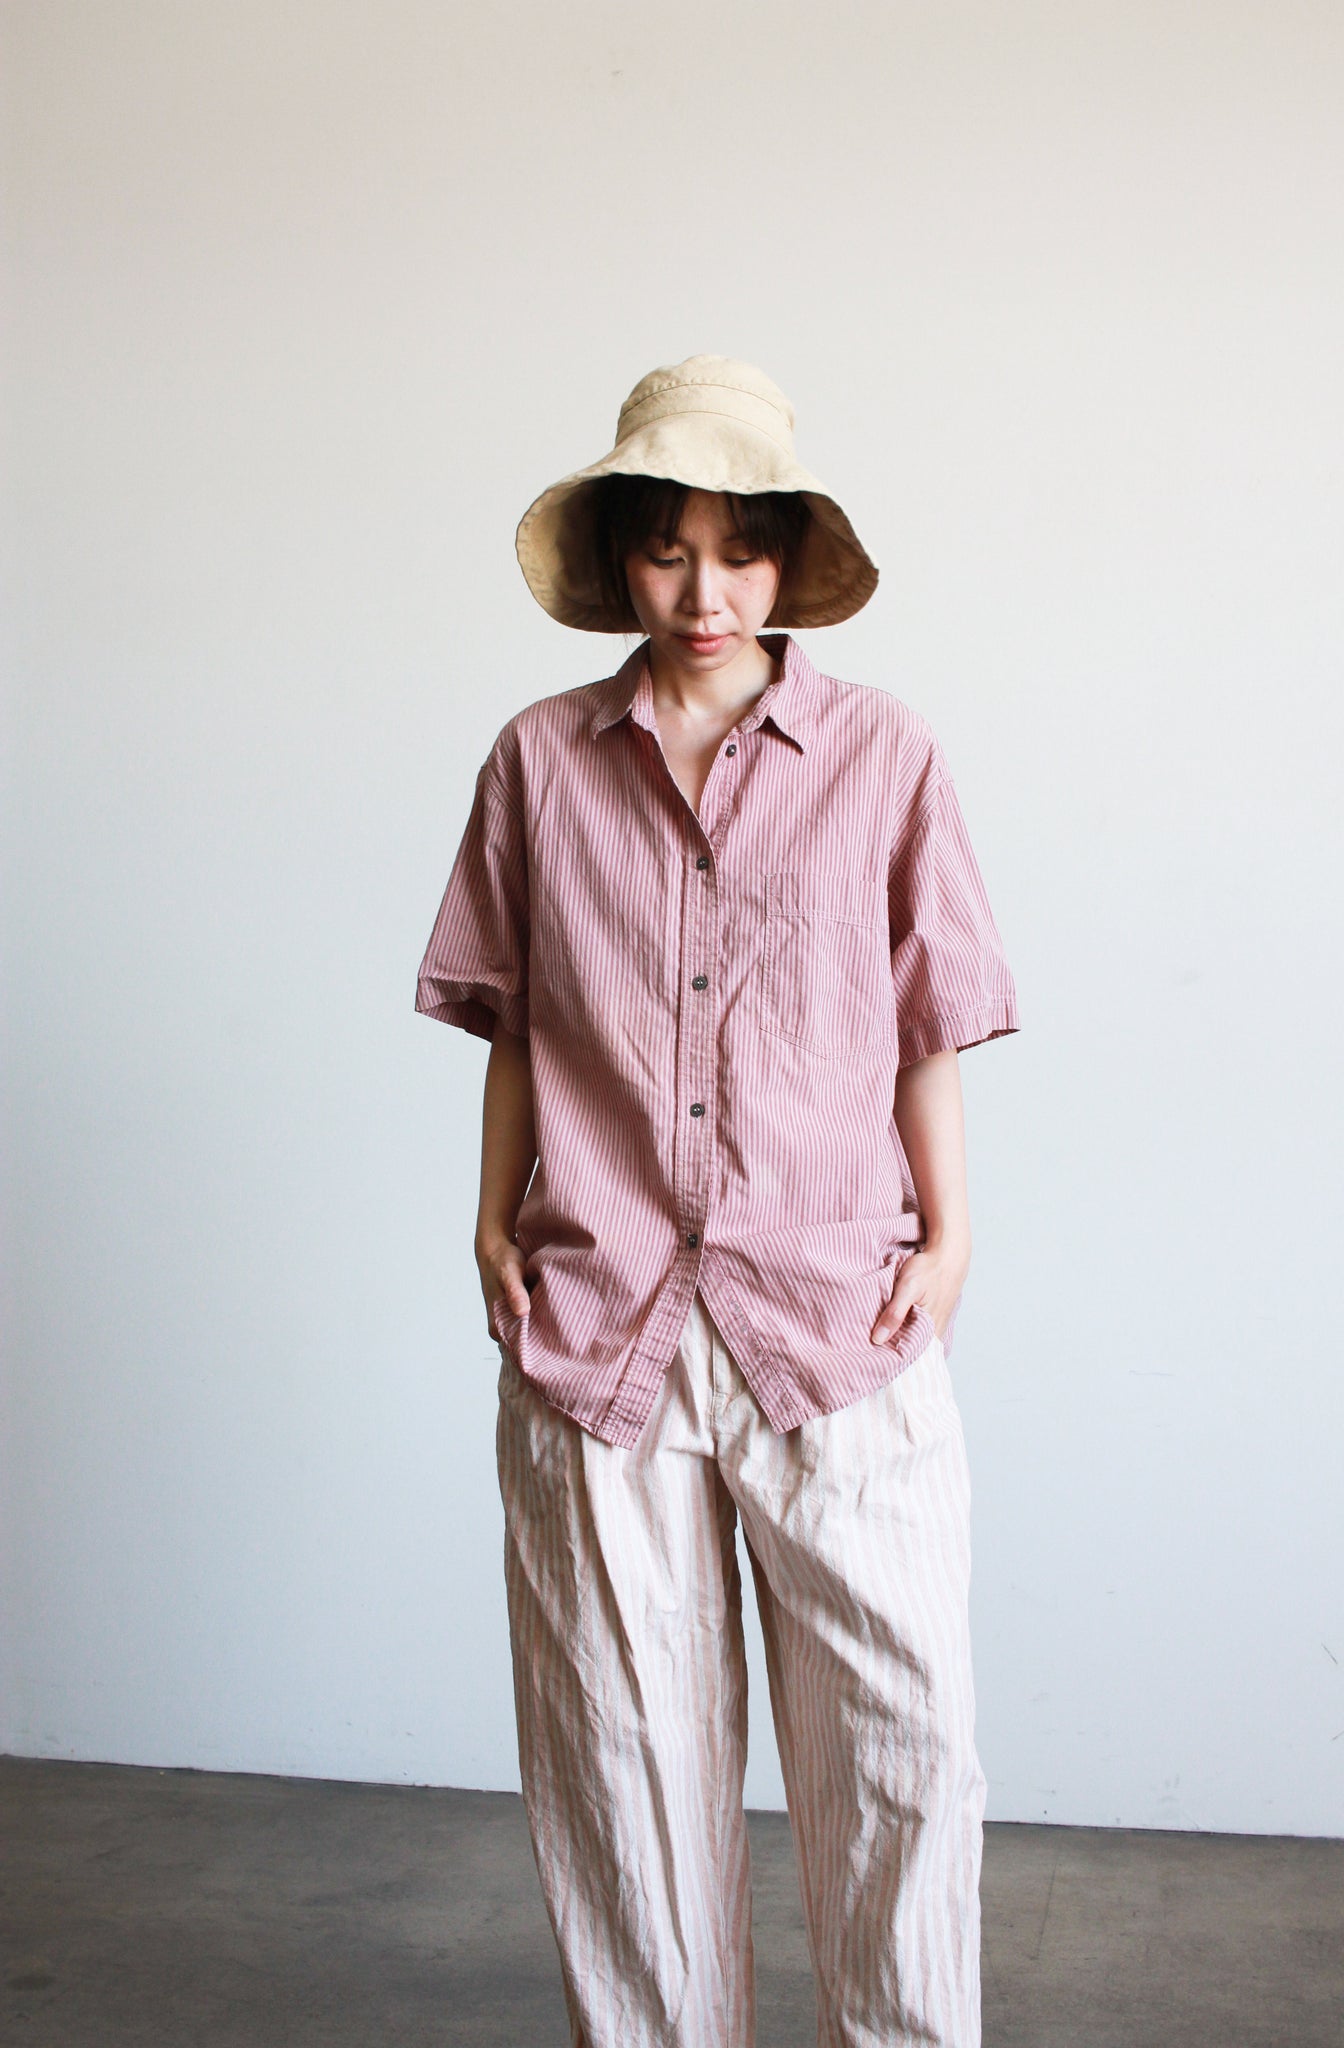 1980s Rose Pinstriped Cotton Button Up Blouse